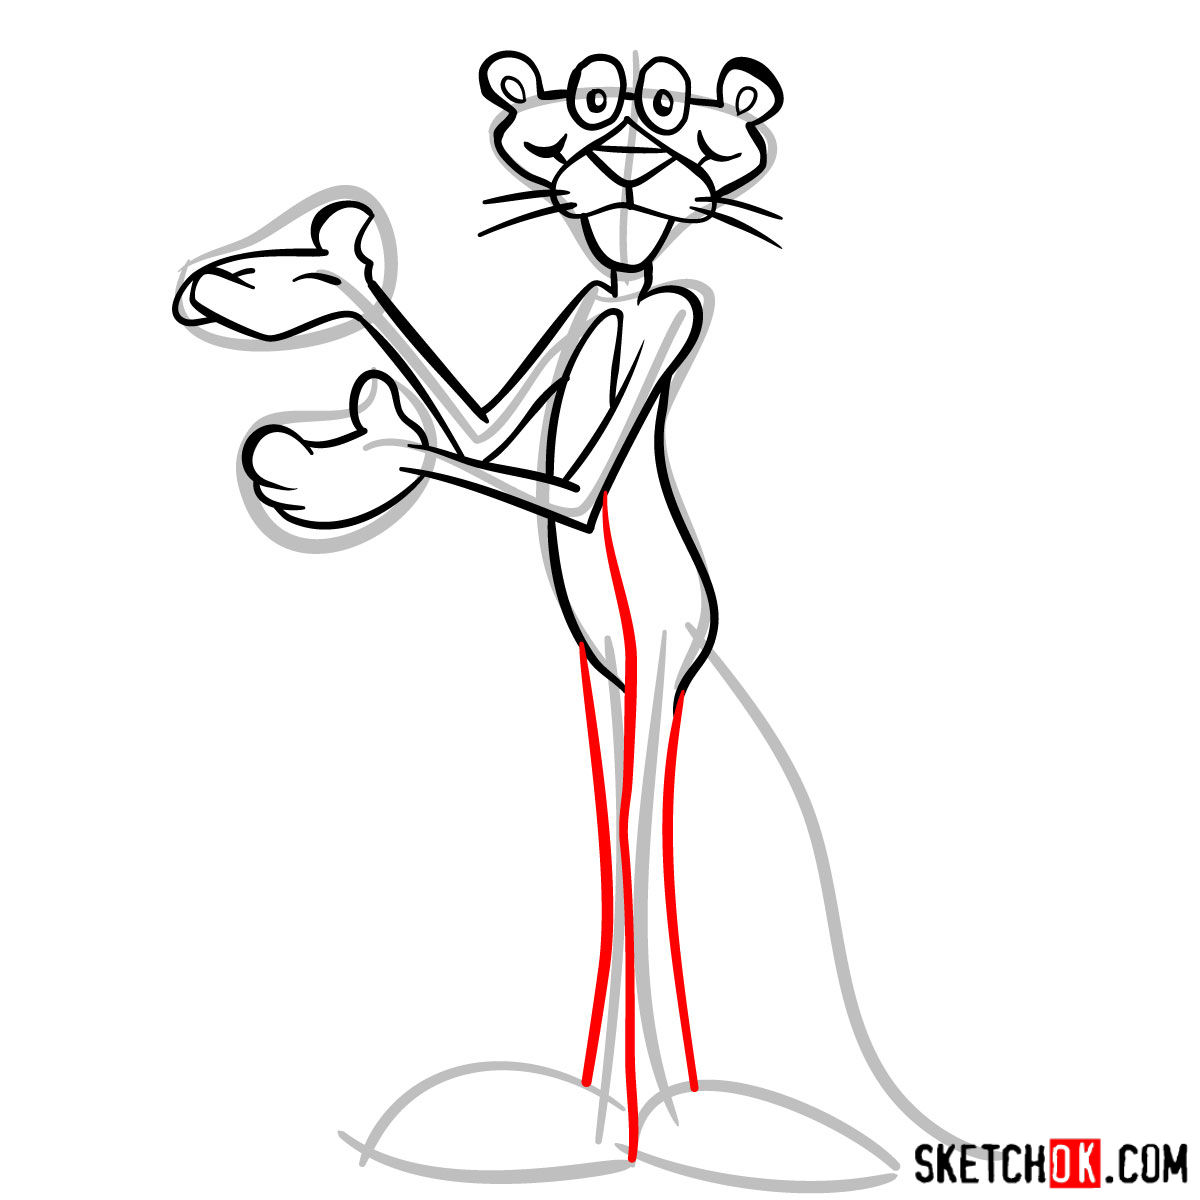 How to draw the Pink Panther - Step by step drawing tutorials